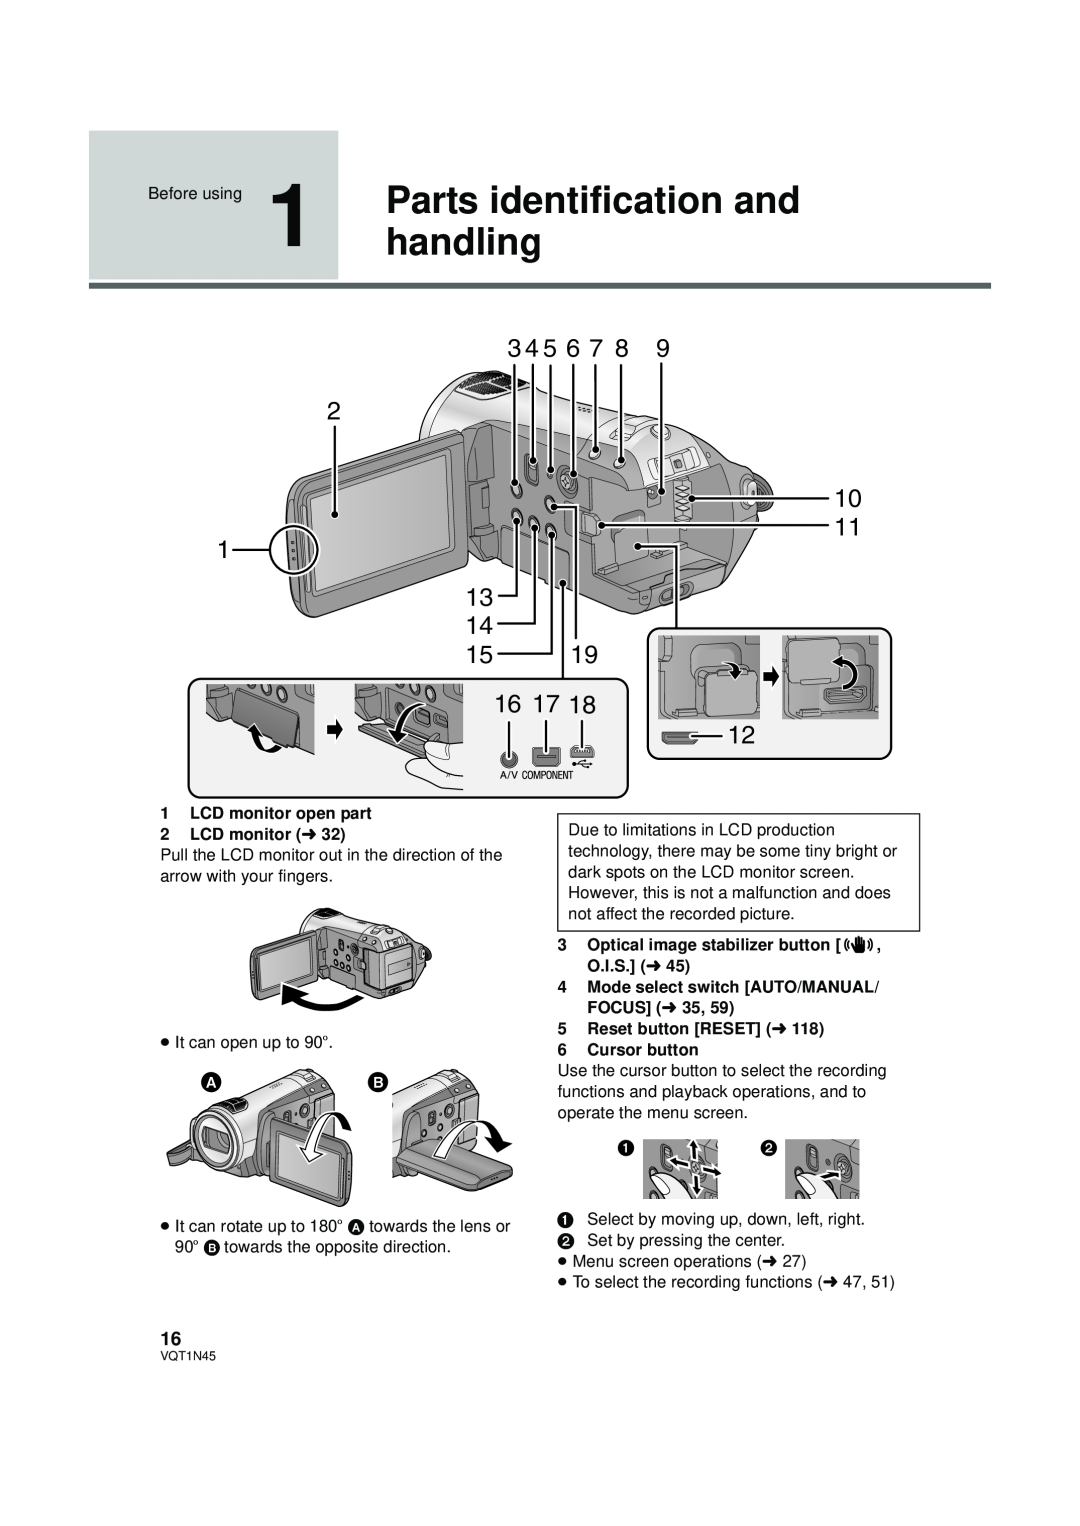 Panasonic HDC-SD9PC manual Parts identification and, handling, Before using, 1LCD monitor open part 2LCD monitor l 